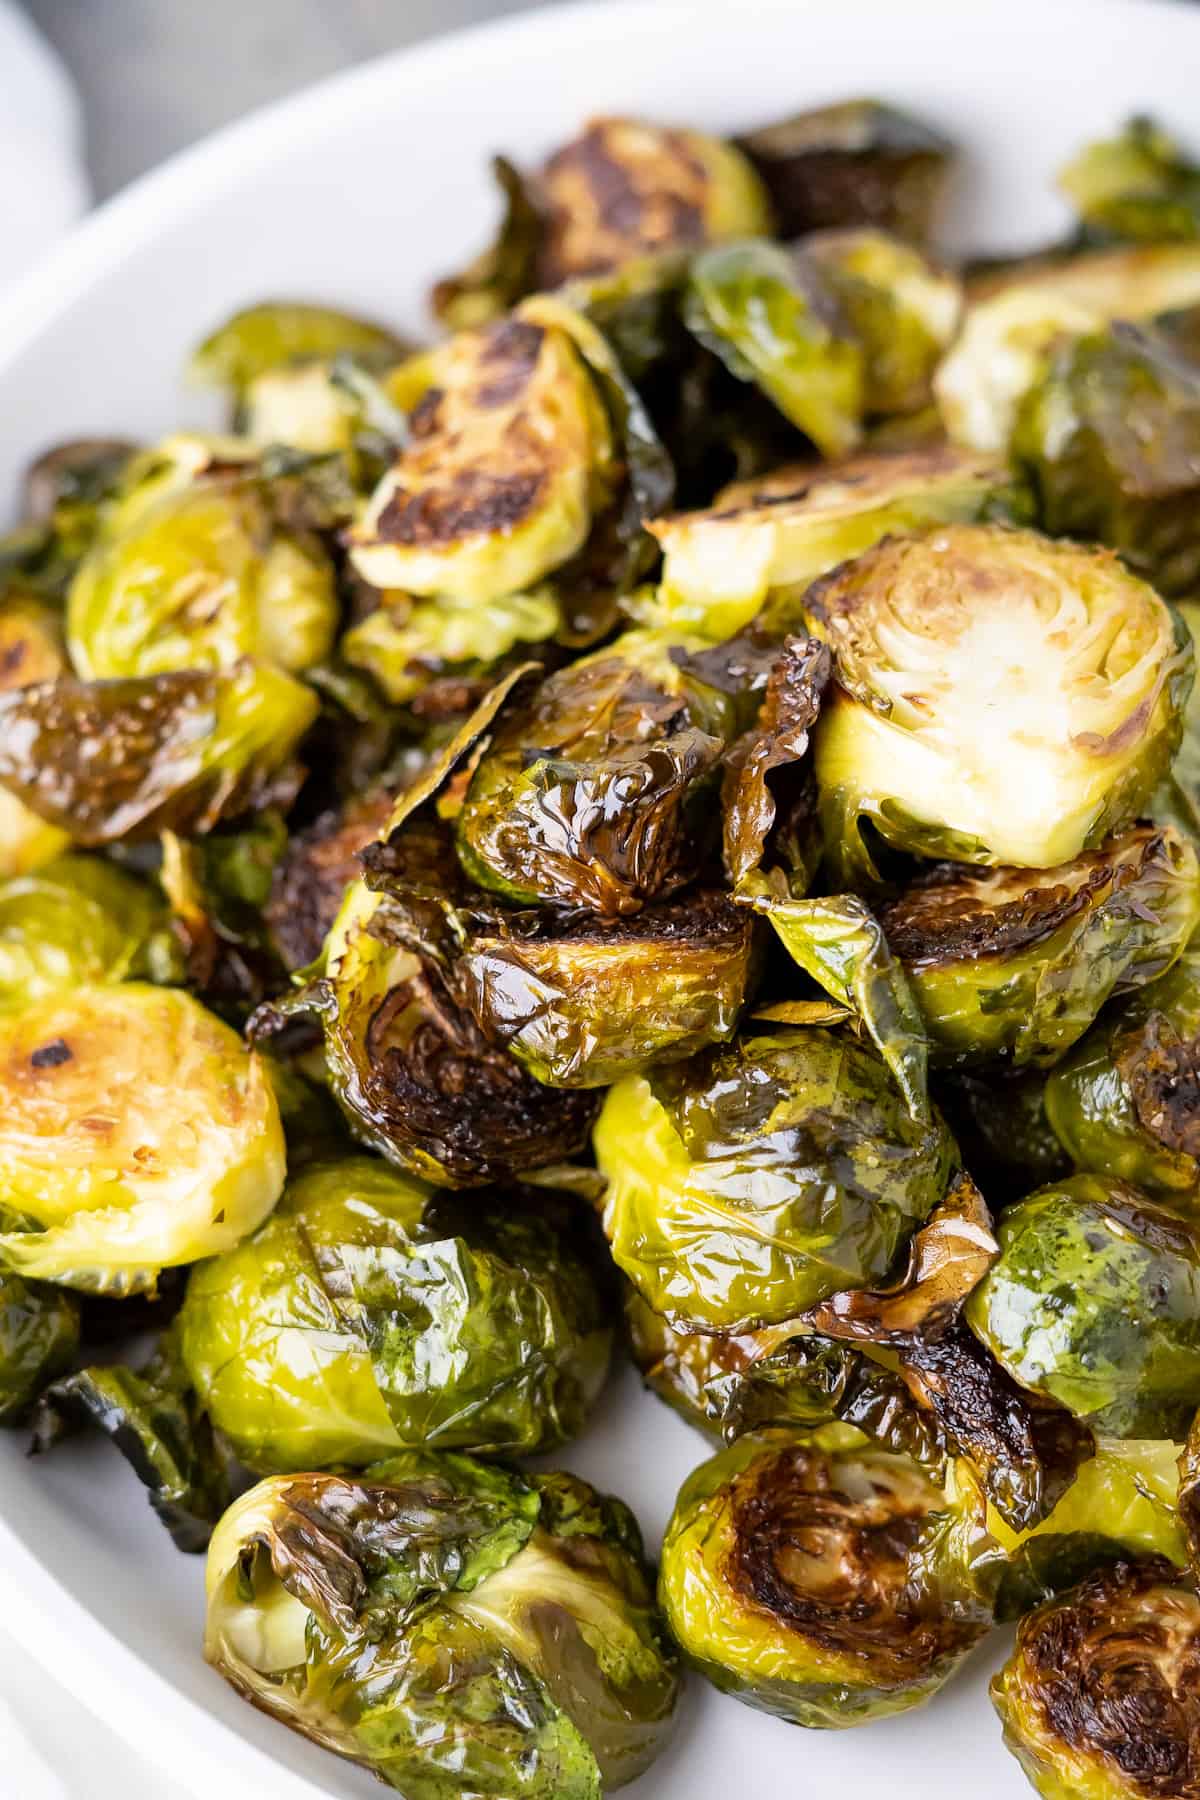 A close up of crispy roasted brussels sprouts to show the super crunchy little leaves lightly coated in oil.